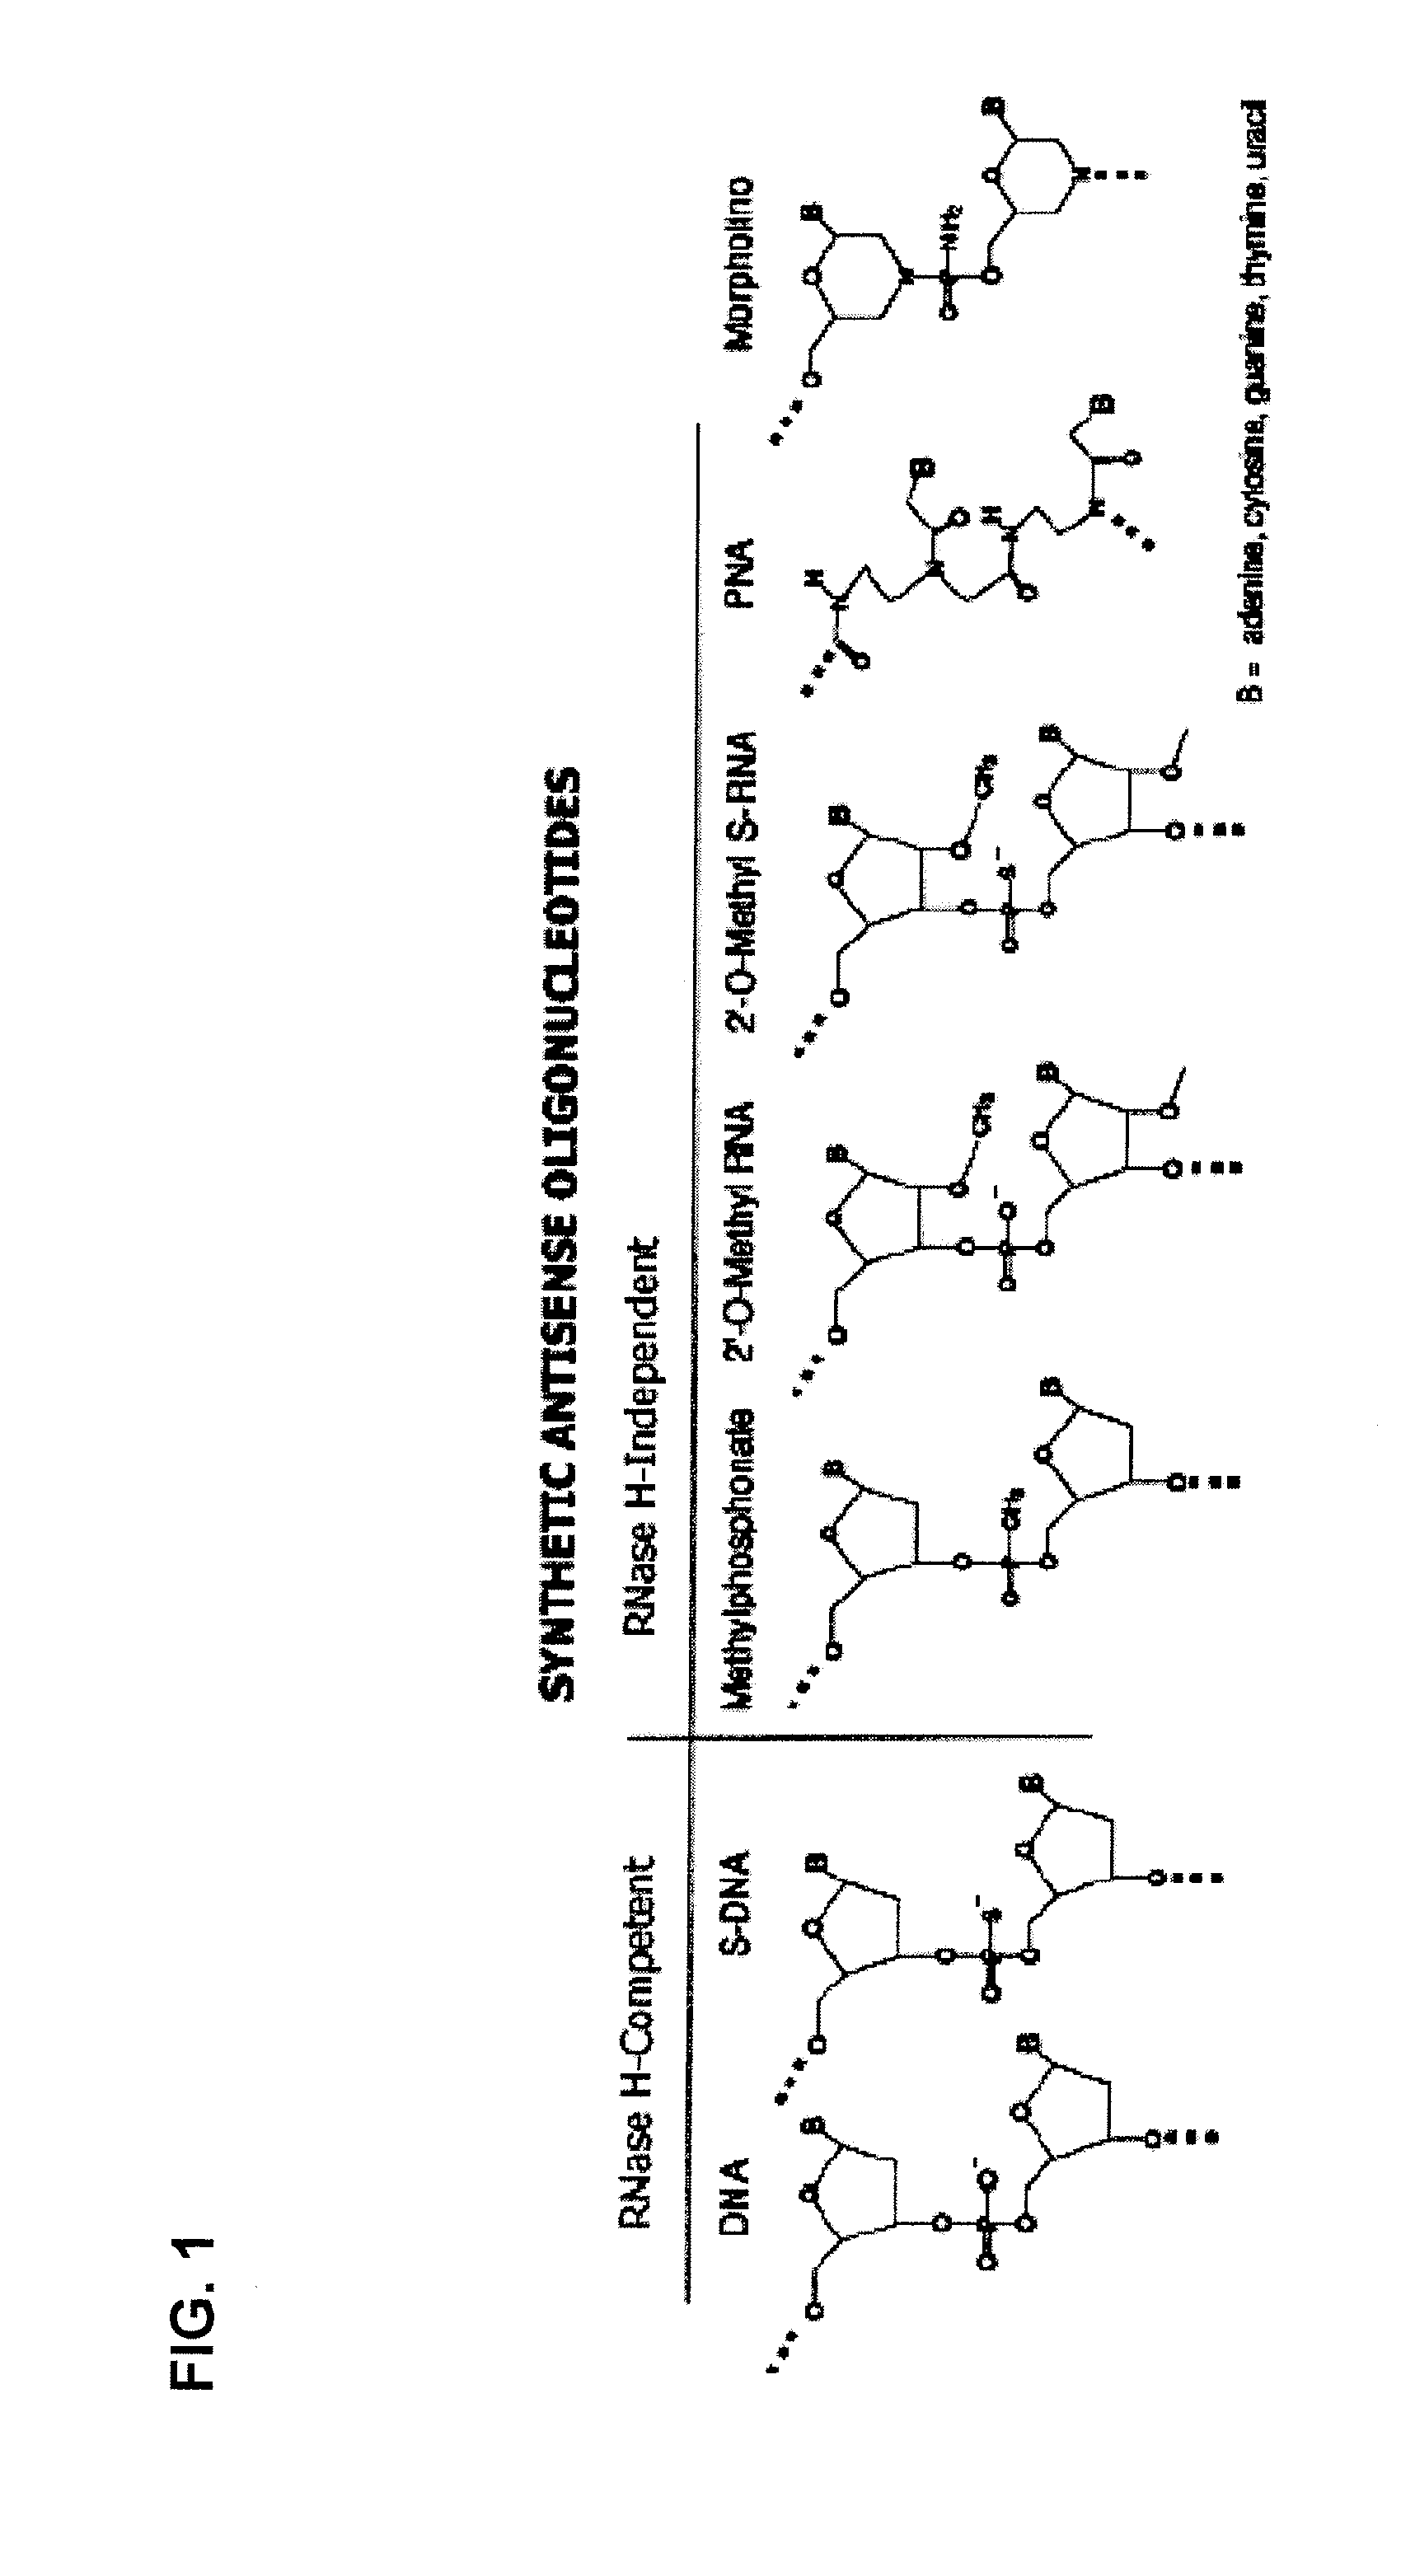 Tricyclo-dna antisense oligonucleotides, compositions, and methods for the treatment of disease